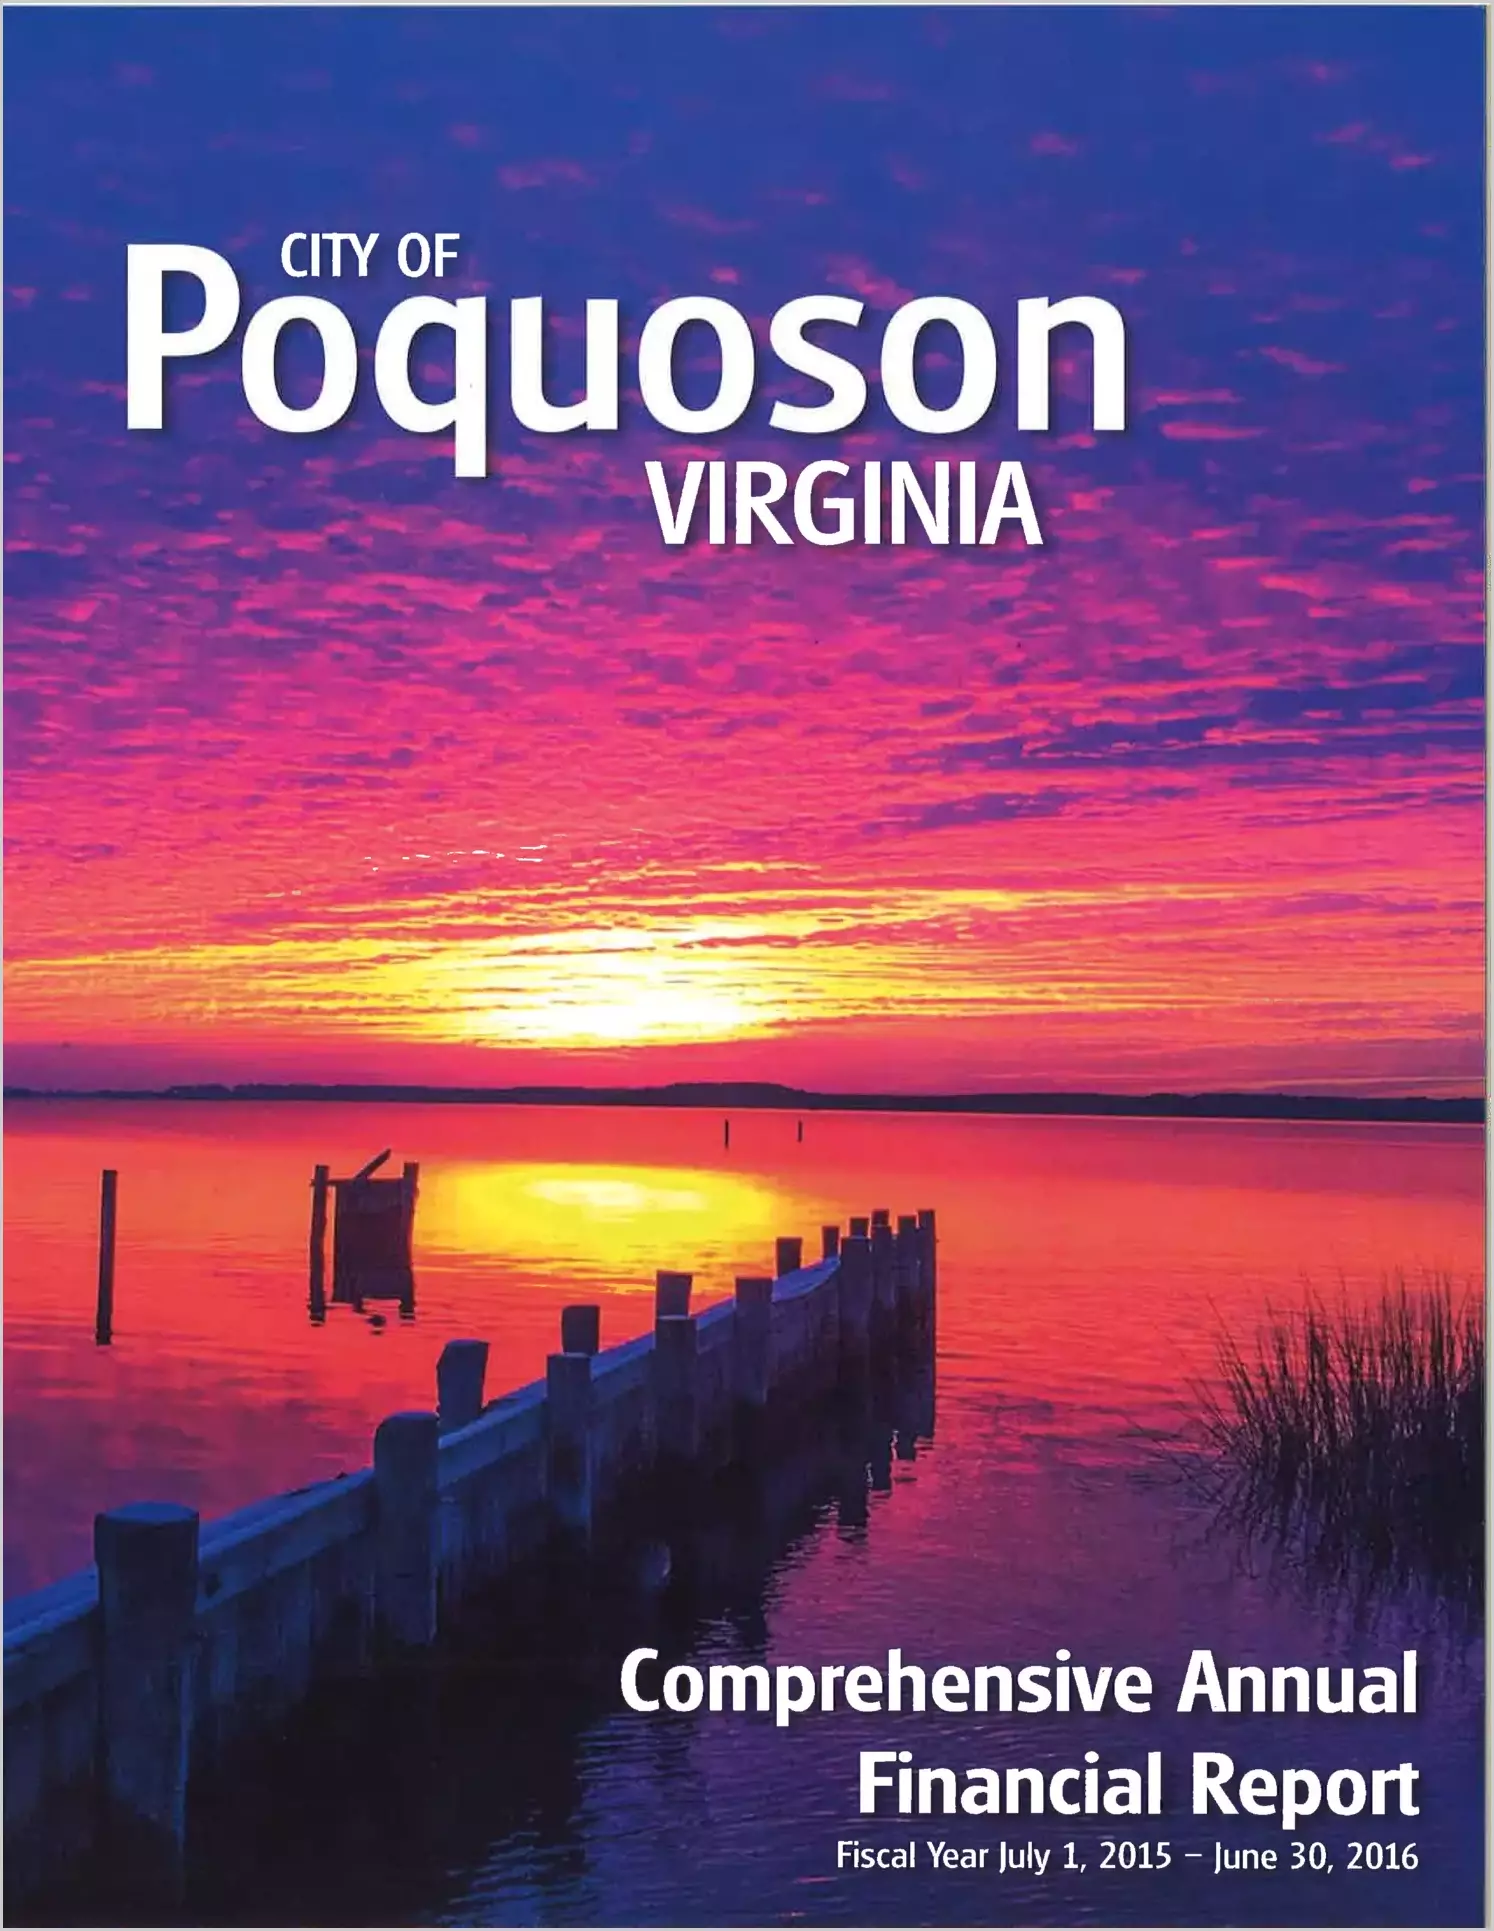 2016 Annual Financial Report for City of Poquoson